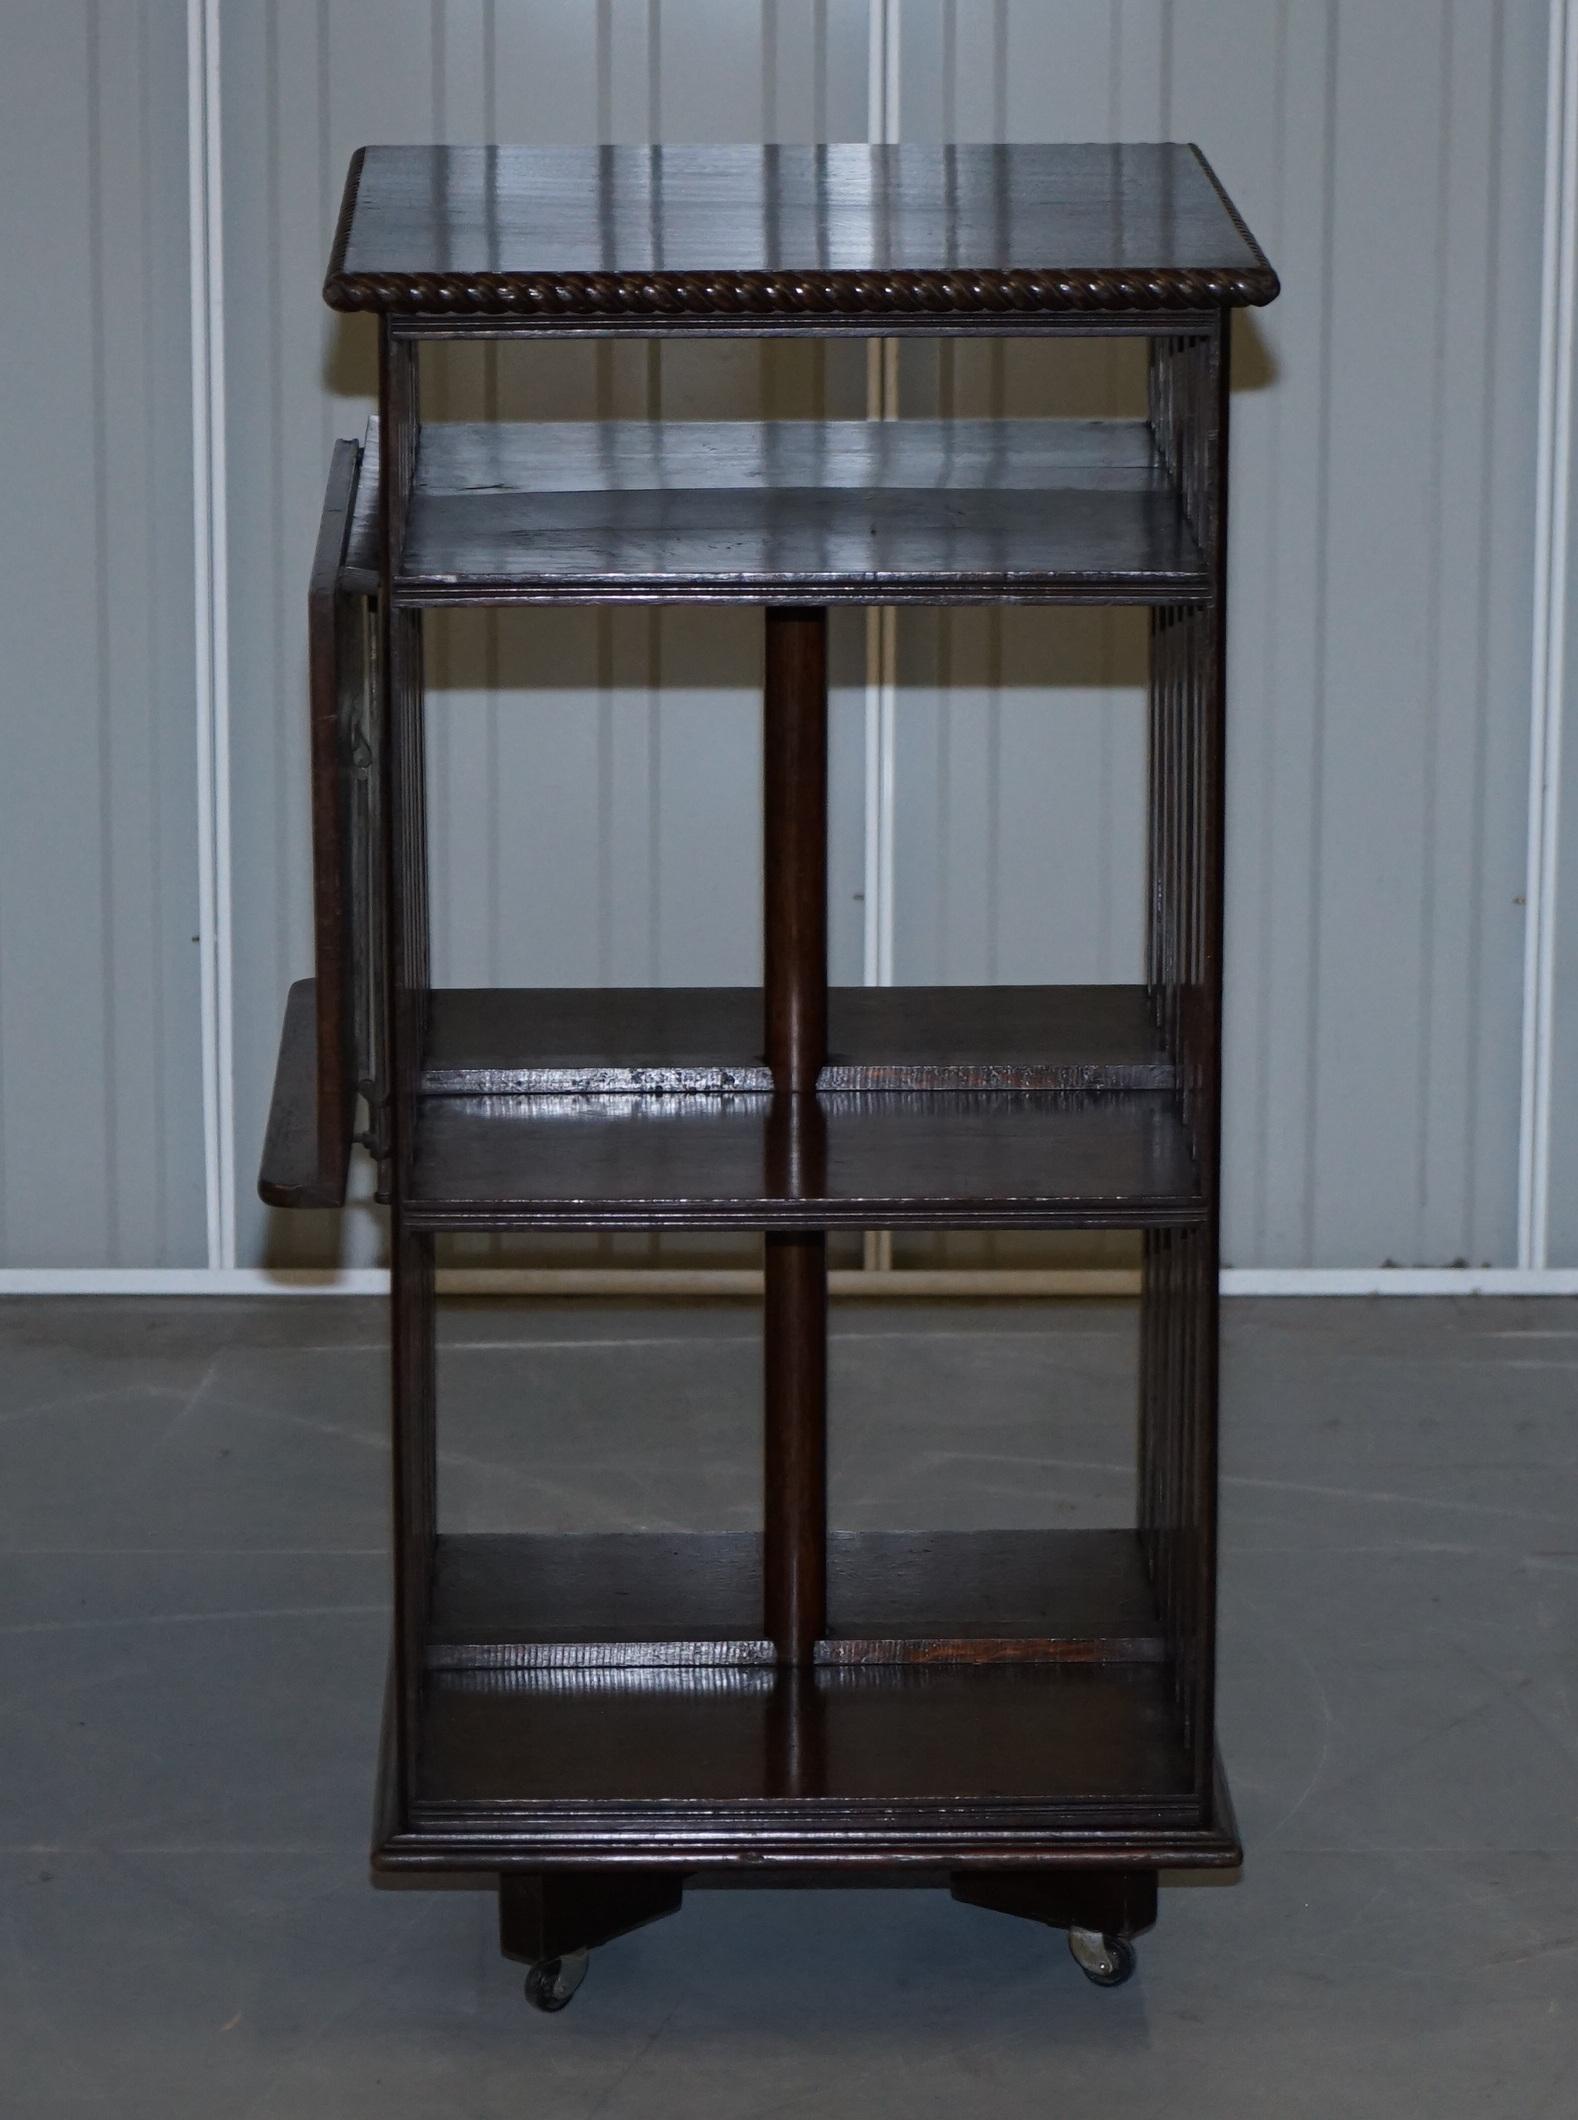 We are delighted to offer for sale this stunning circa 1900 oak revolving bookcase with lift up desk or book sorting table 

An exceptionally well made and decorative library bookcase. Its rare to find them with the table for sorting the books, I